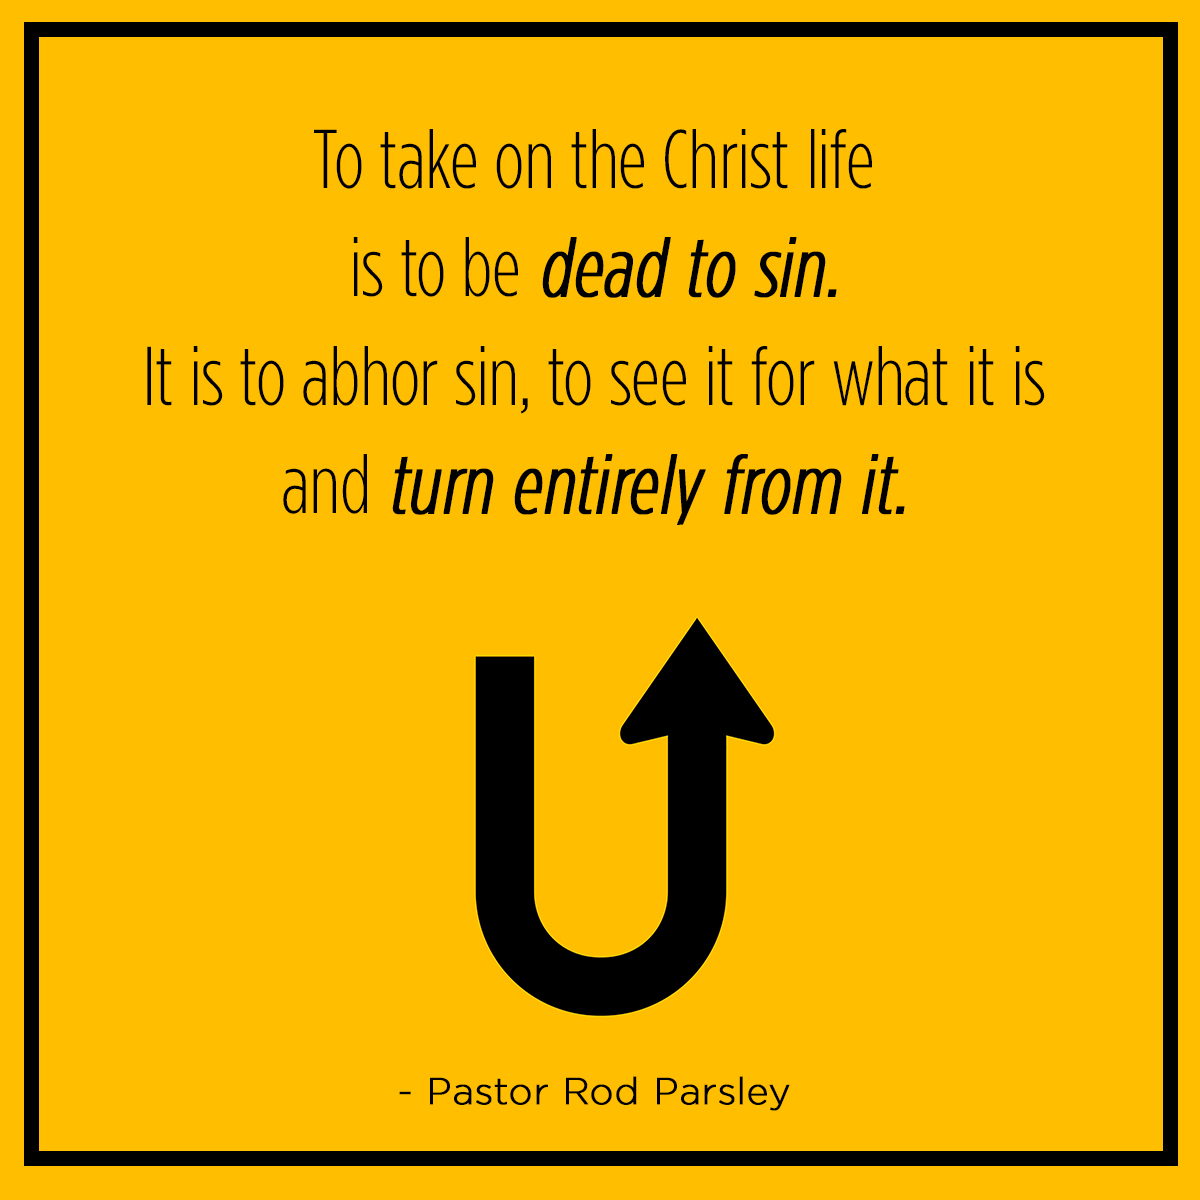 “To take on the Christ life is to be dead to sin. It is to abhor sin, to see it for what it is and turn entirely from it.” – Pastor Rod Parsley